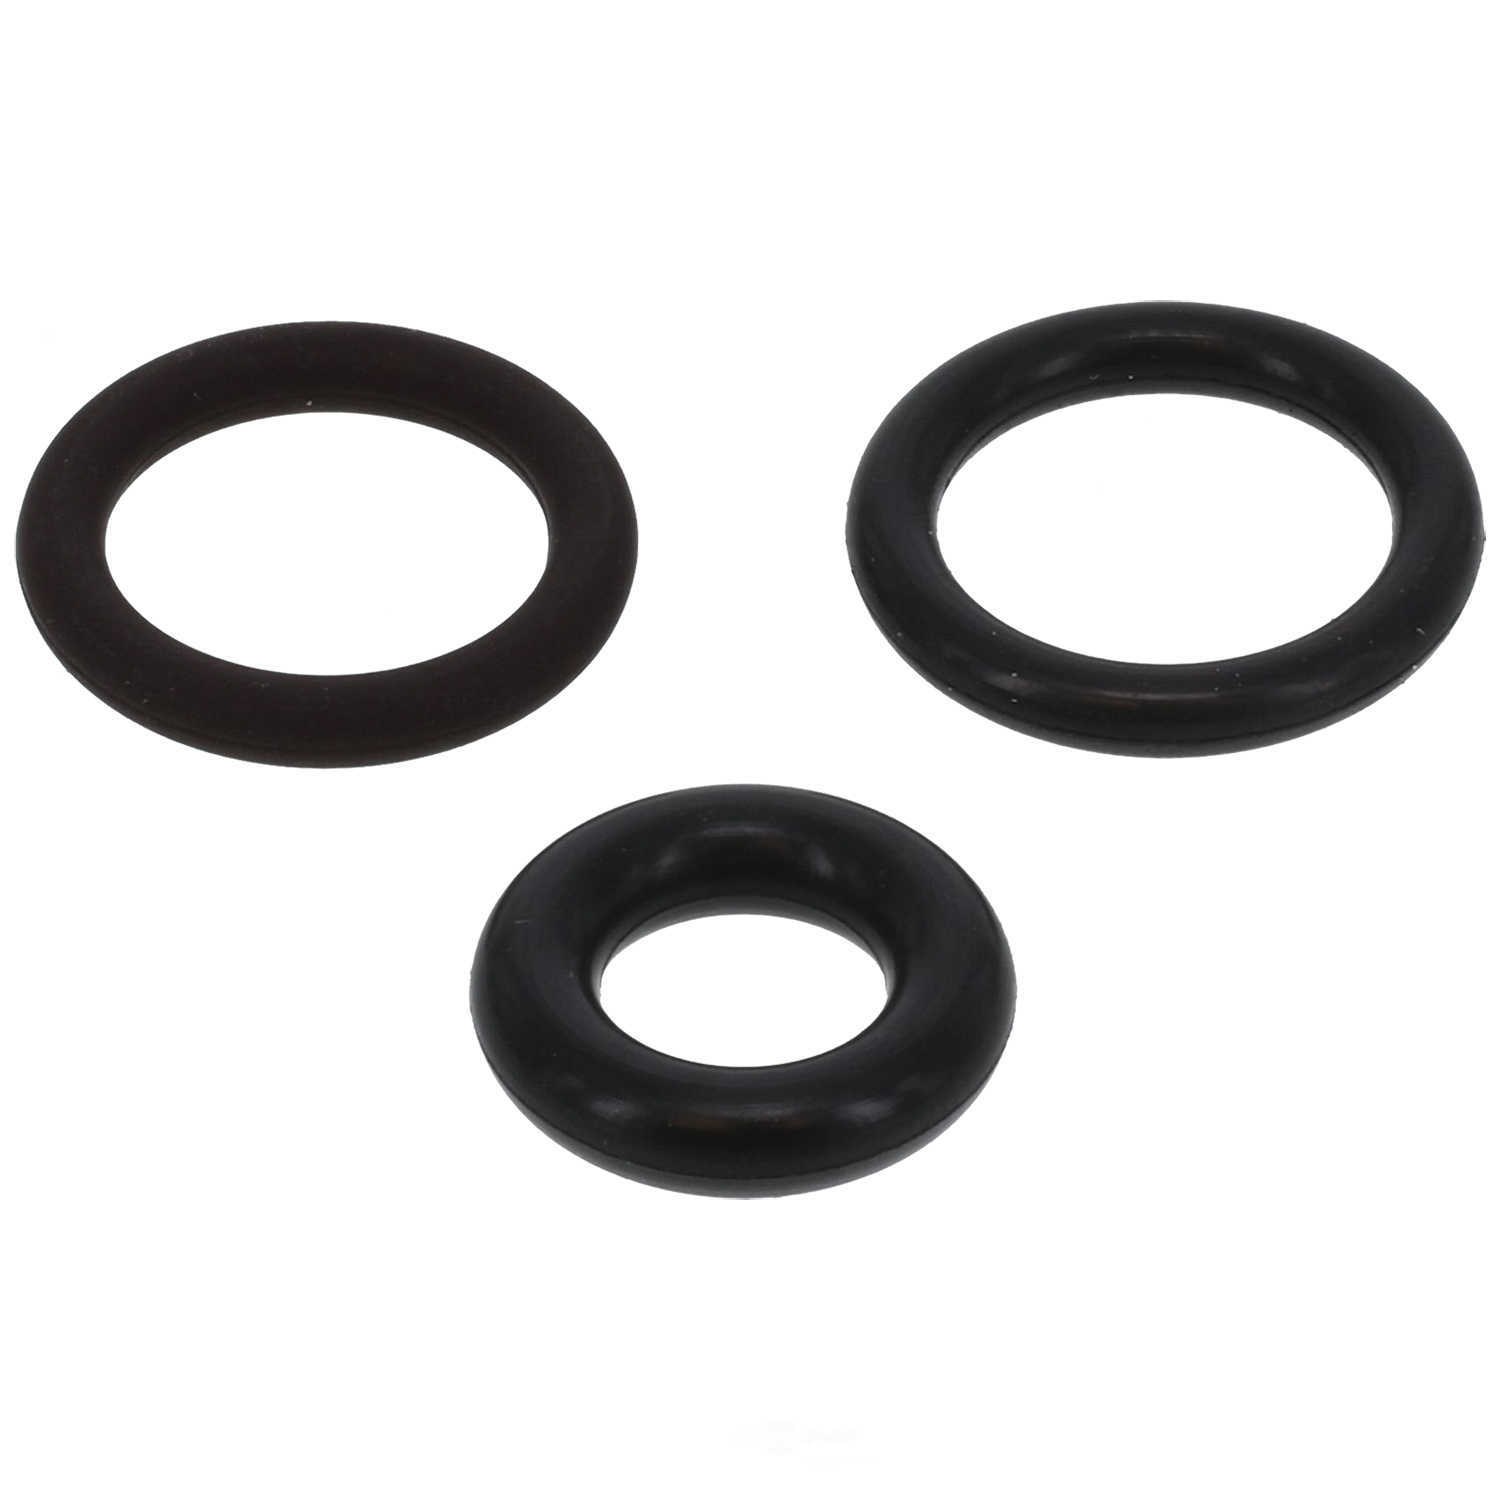 GB REMANUFACTURING INC. - Fuel Injector Seal Kit - GBR 8-046